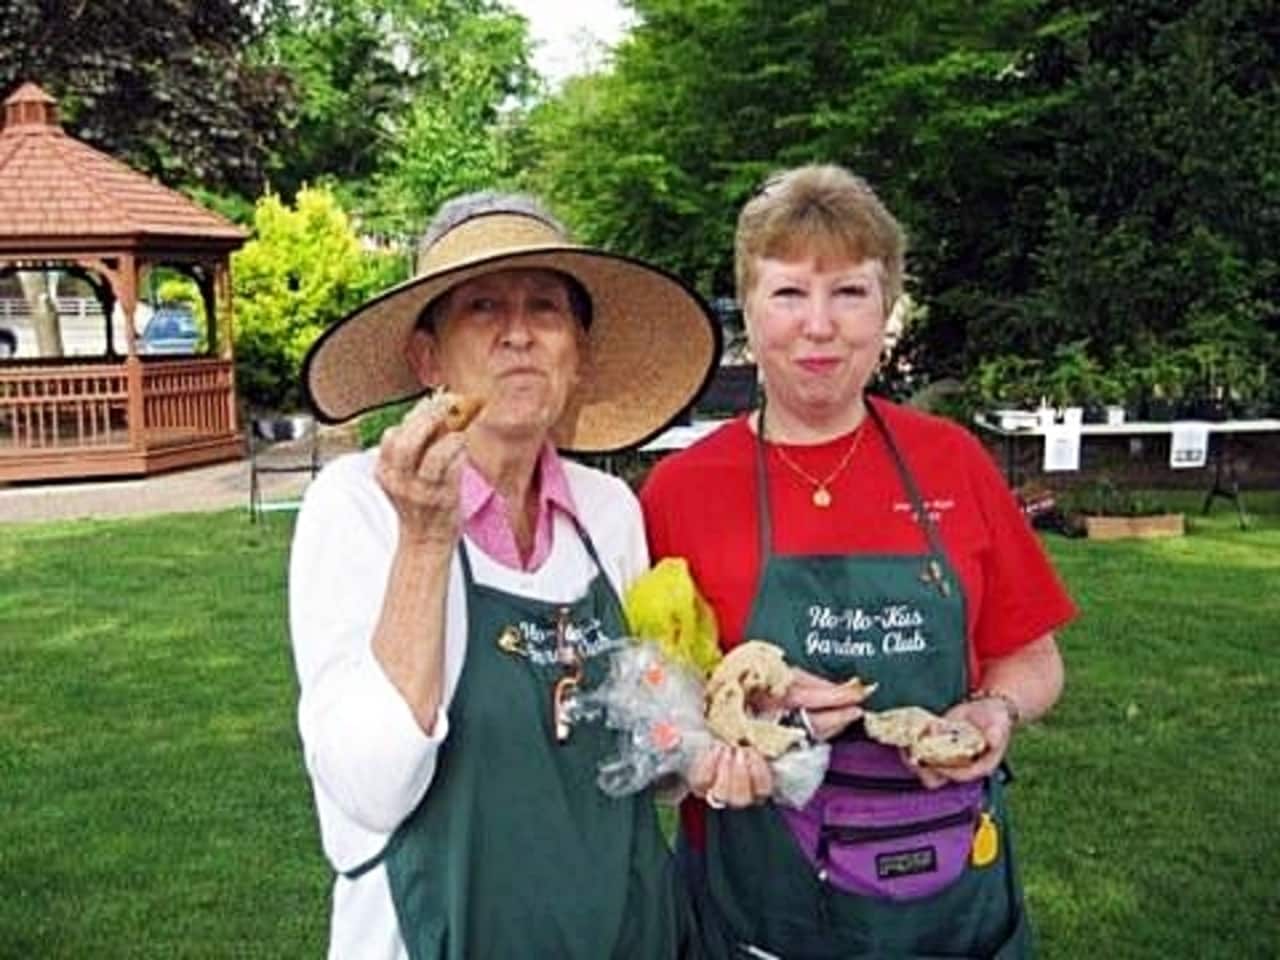 Ladies with the Ho-Ho-Kus Garden Club sample the goods at a prior plant and bake sale.